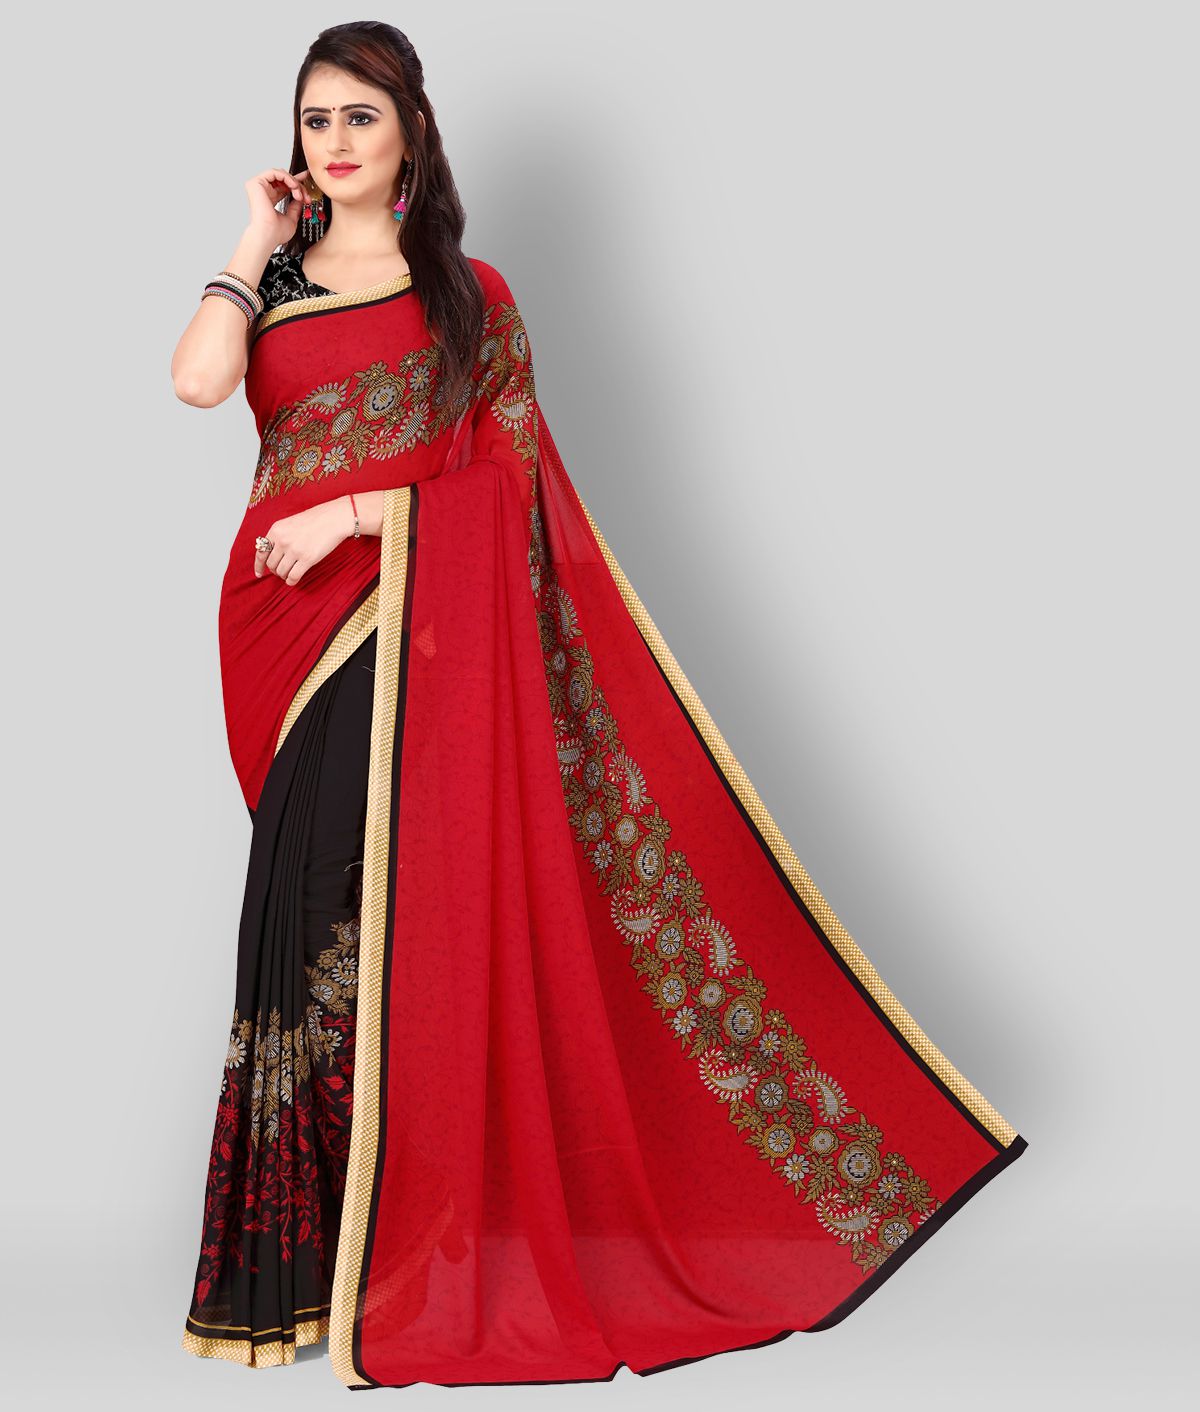     			Anand Sarees - Multicolor Georgette Saree With Blouse Piece (Pack of 1)